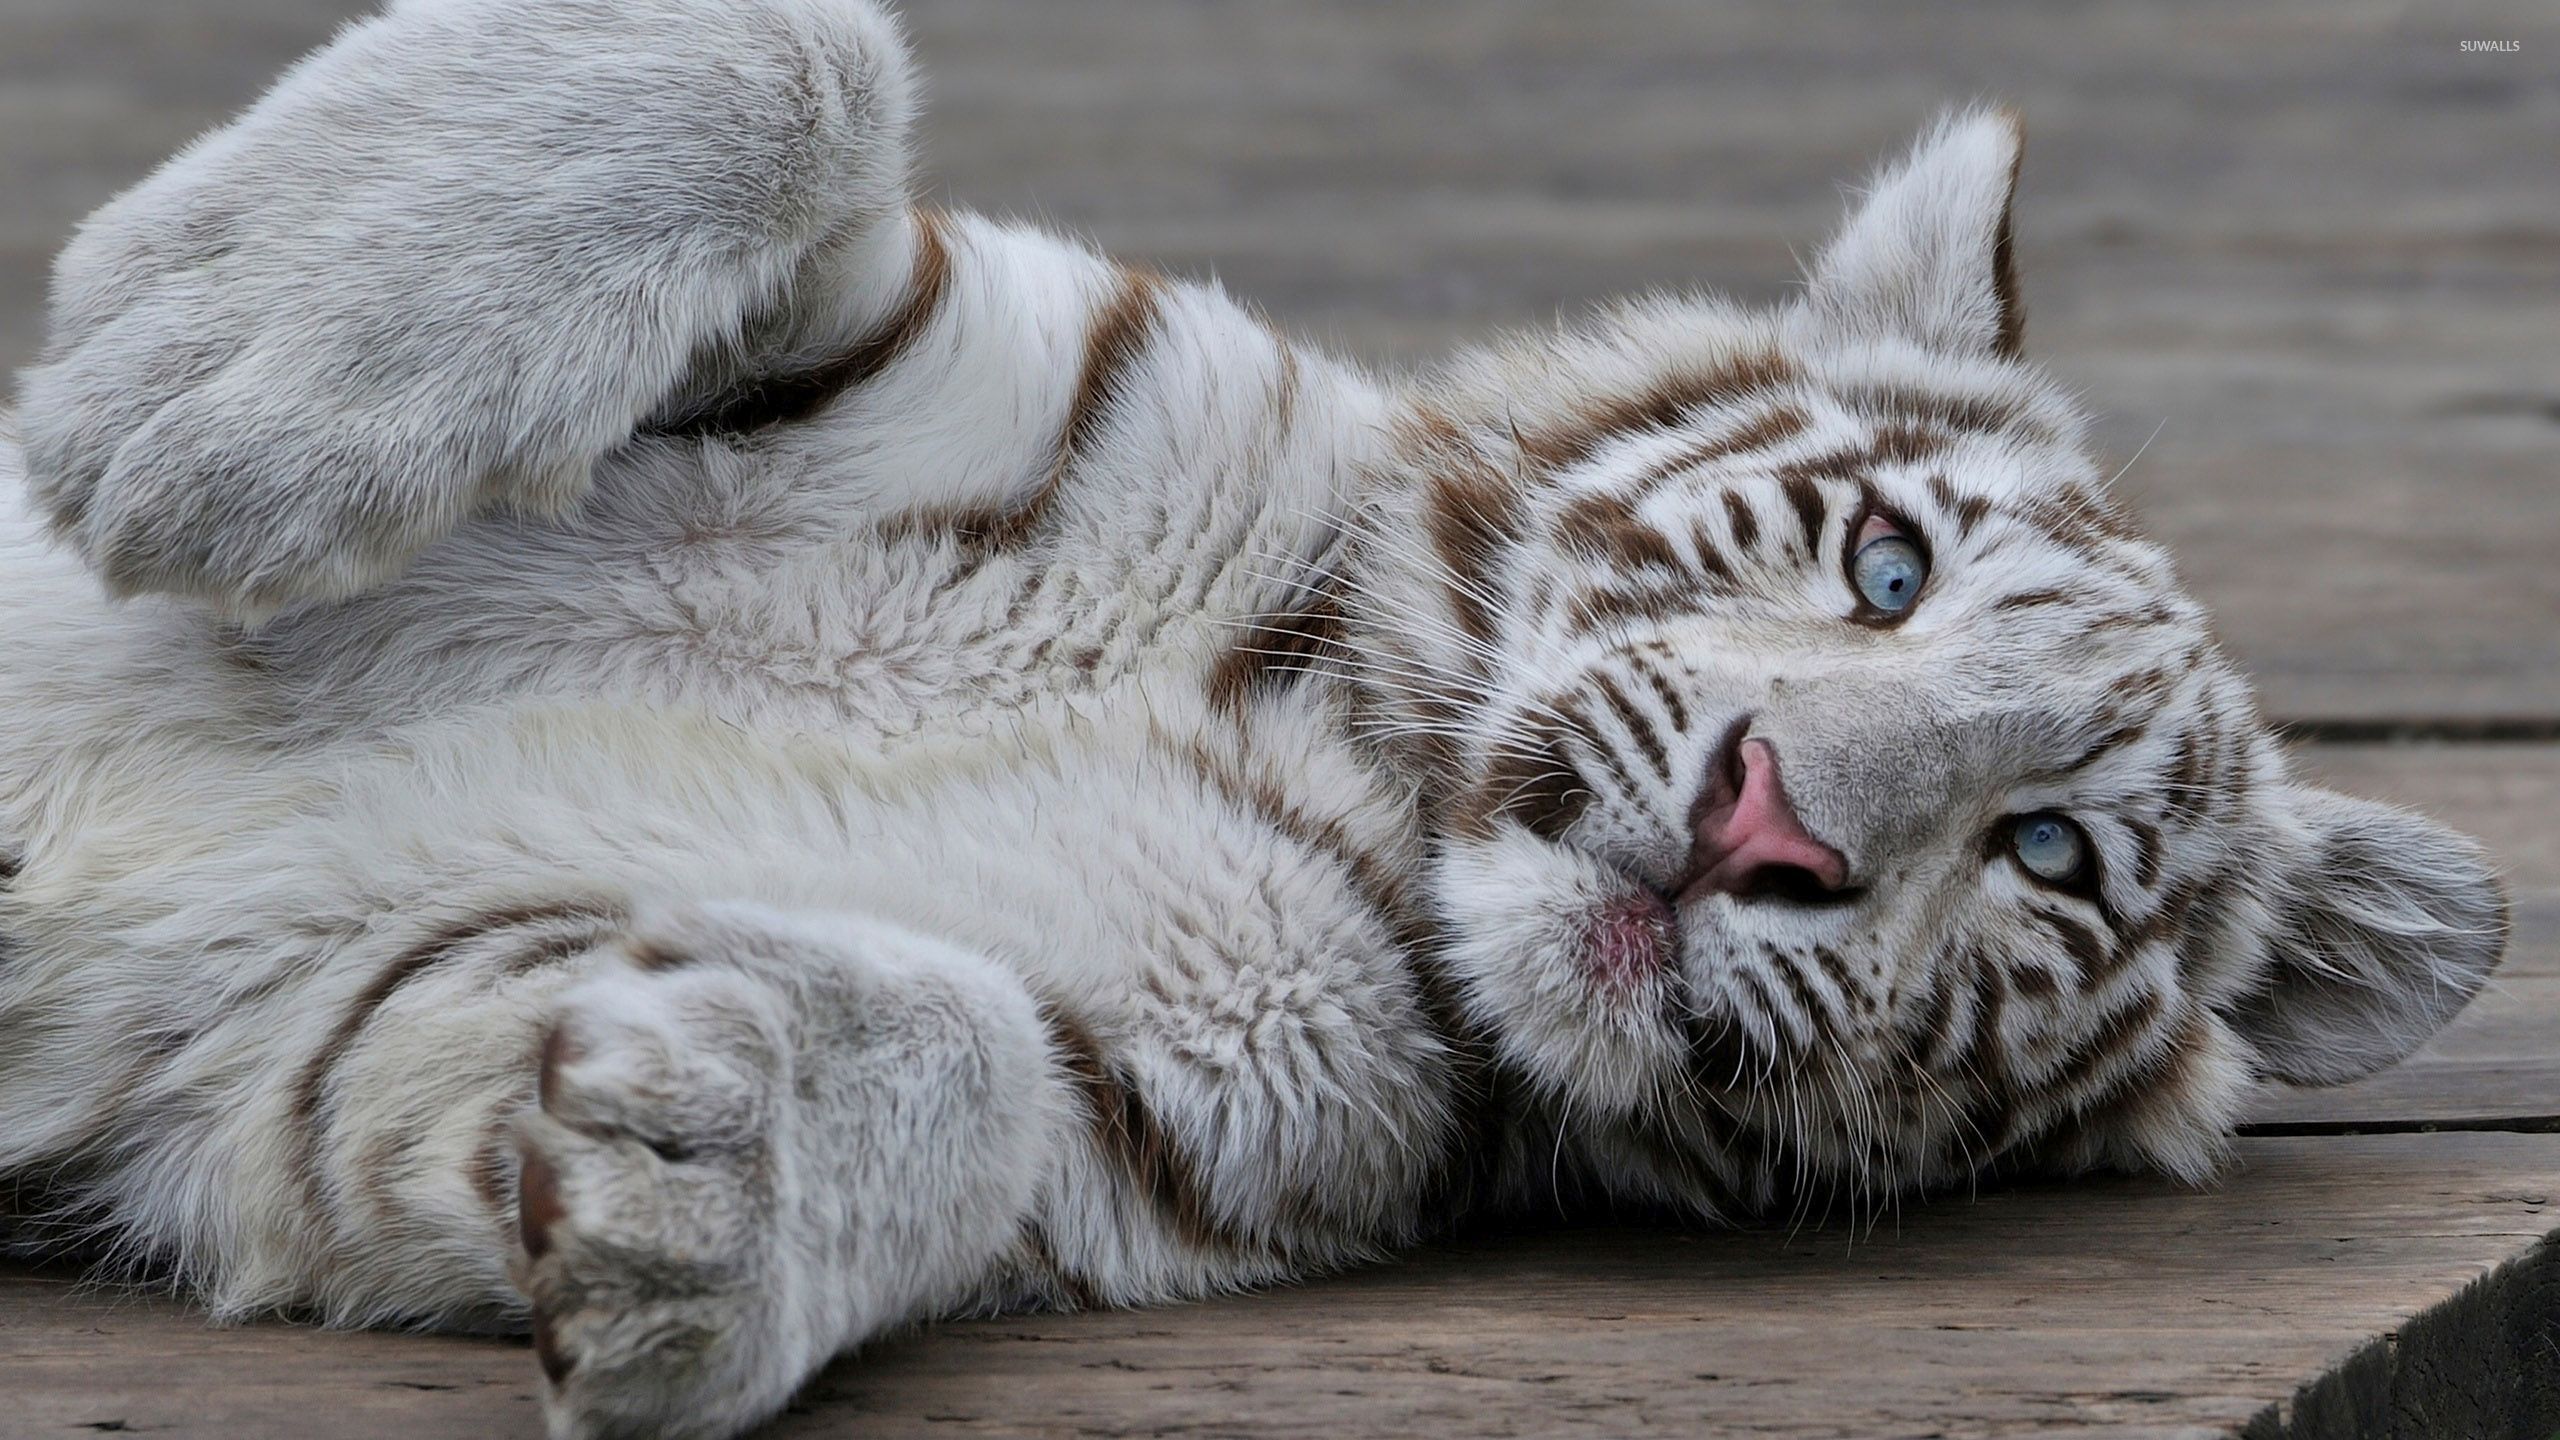 White Tiger cub o wooden floor wallpaper   Animal wallpapers   50683